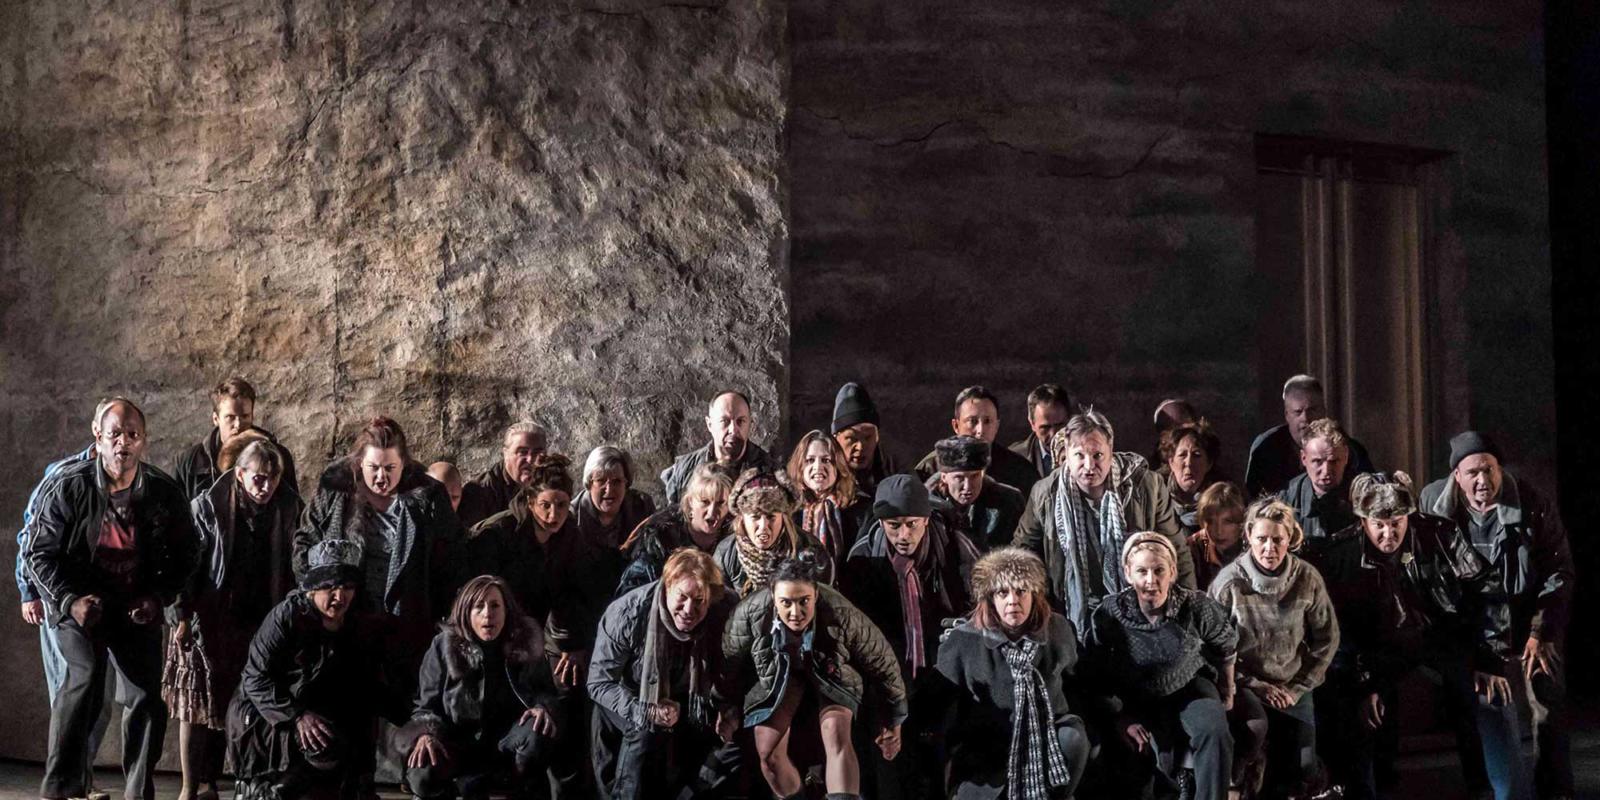 The Winter's Tale Chorus crouching down in winter clothes